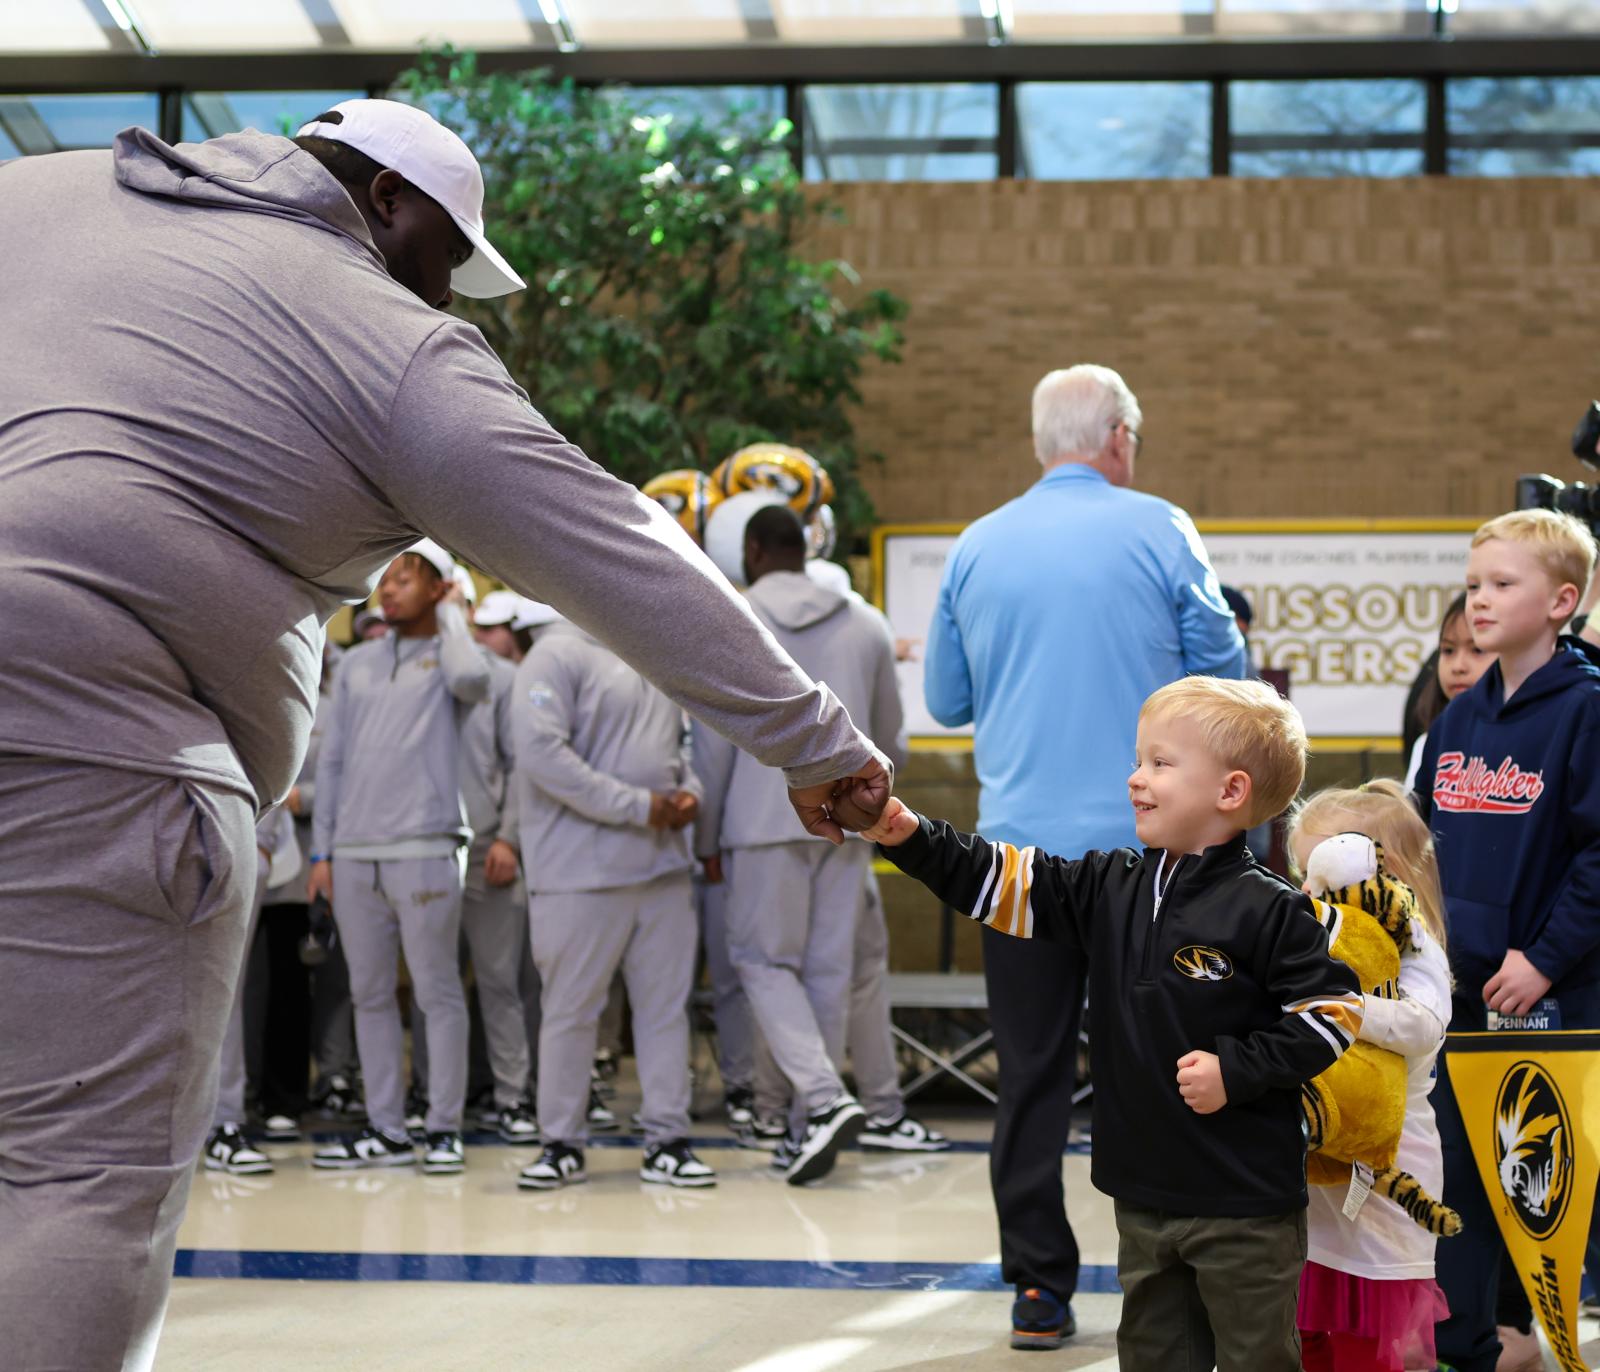 Image from Moments - James Sunchich, 5, gives Missouri Defensive Line coach Al...